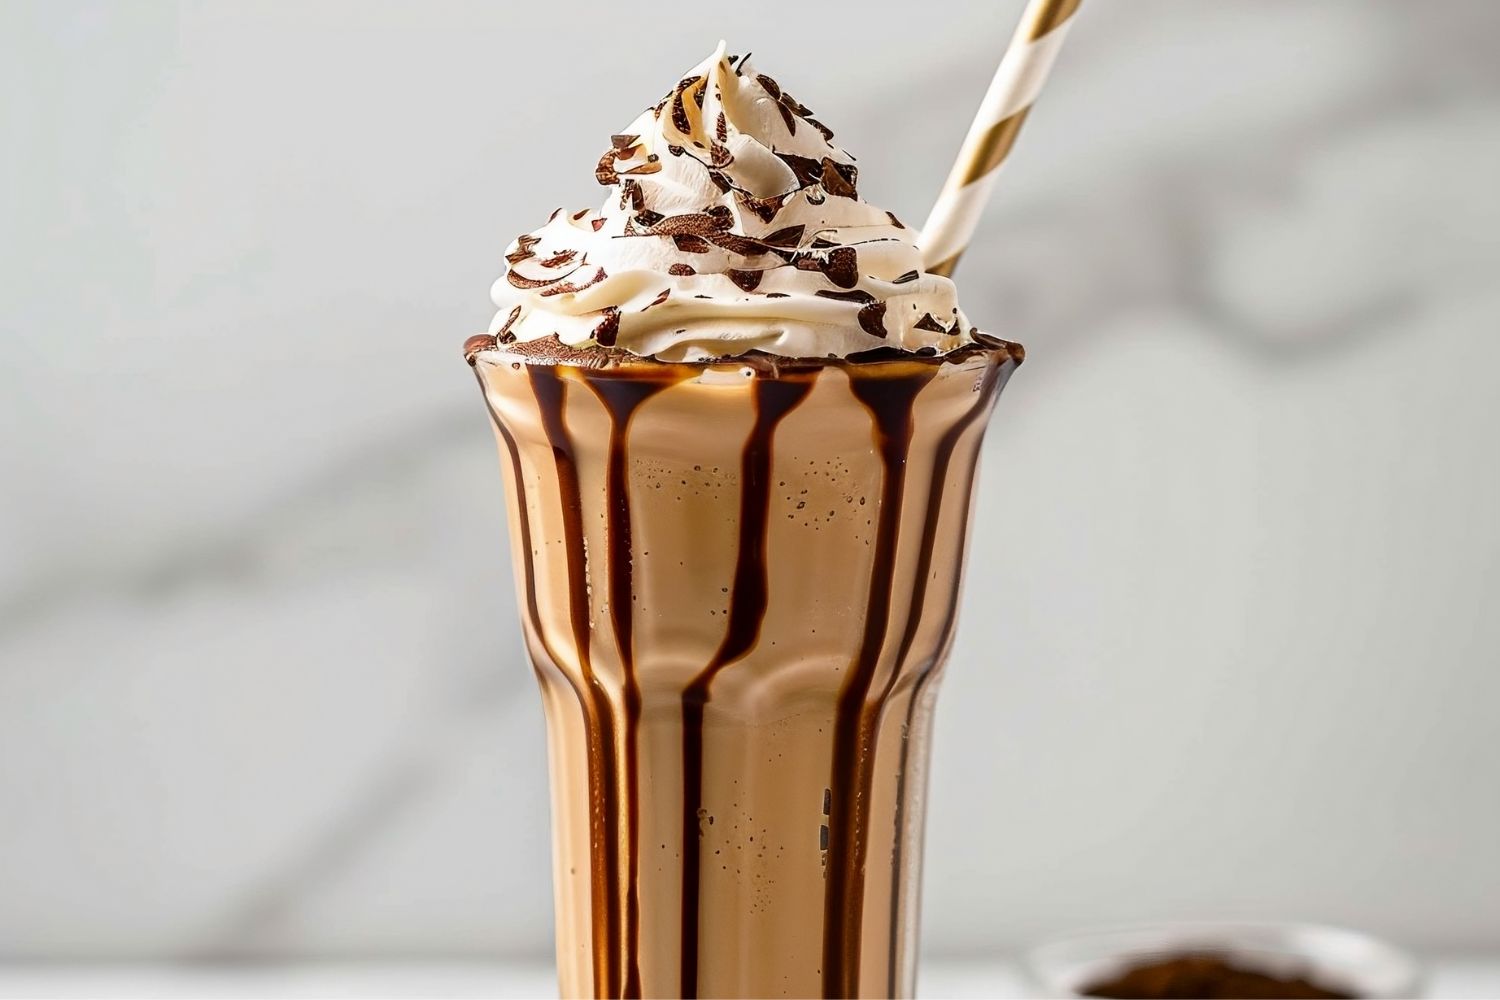 Milkshake made with cold brew coffee and vanilla ice cream for the perfect balance of sweetness and caffeine